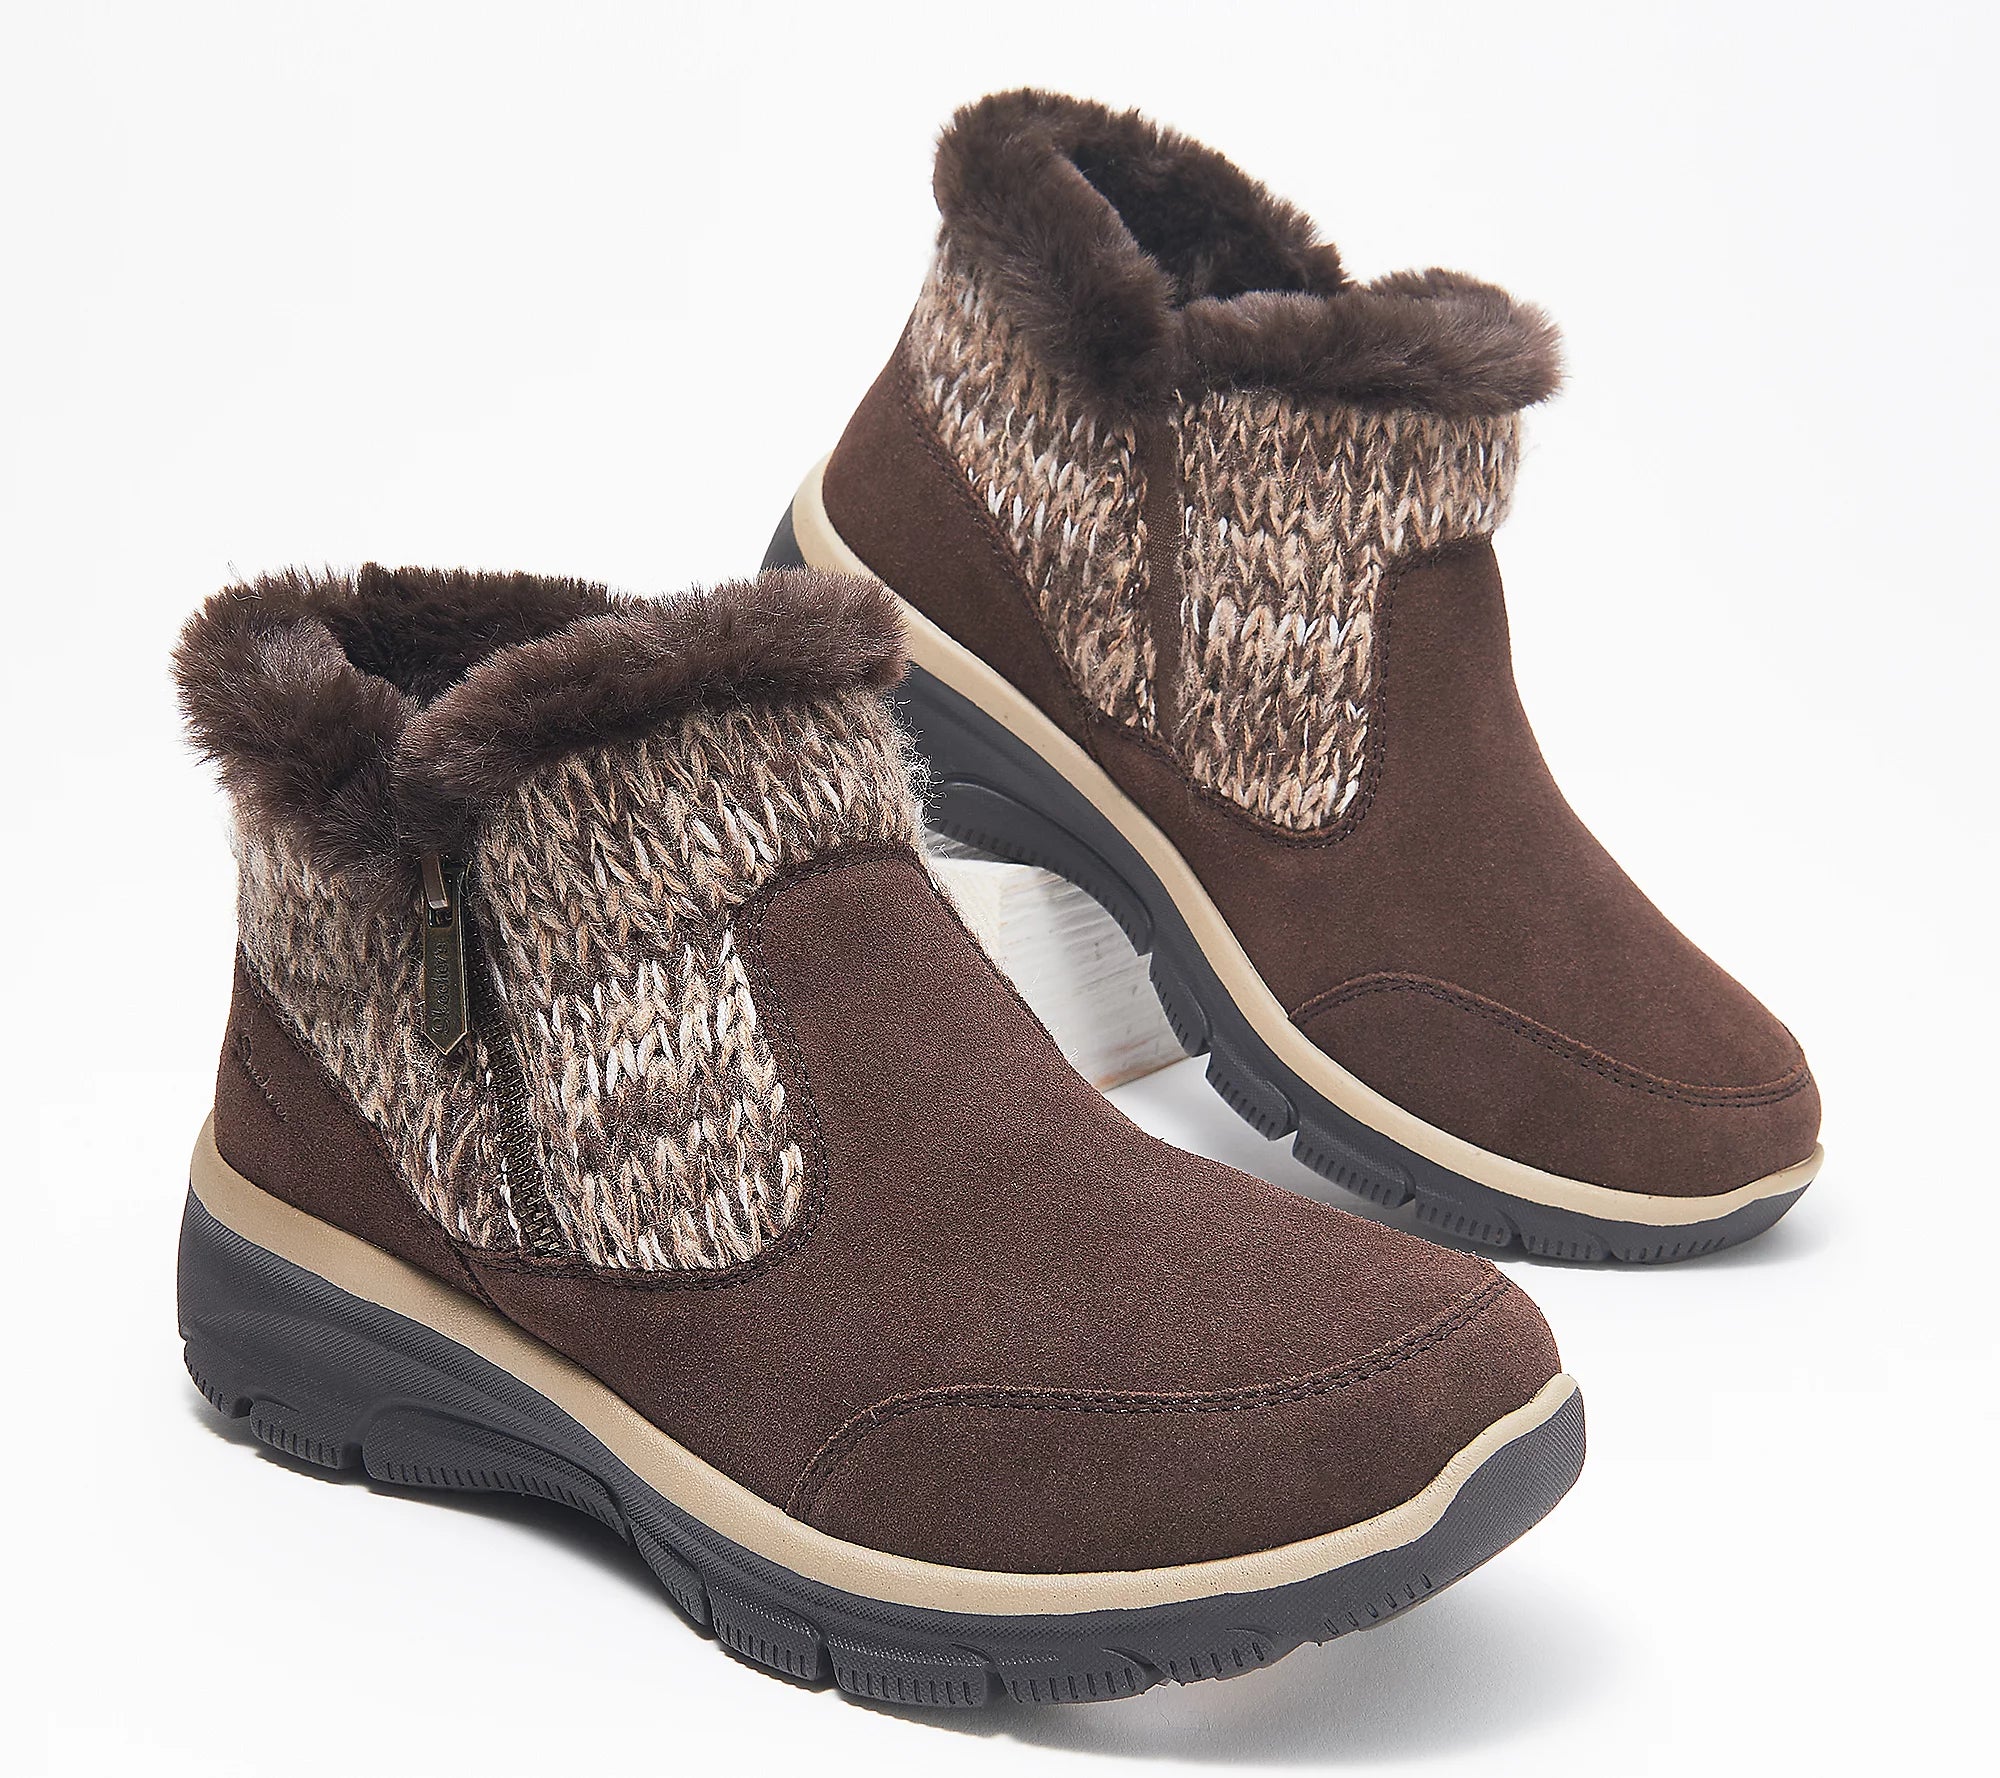 Women's Skechers Easy Going Sweater Knit Ankle Boots